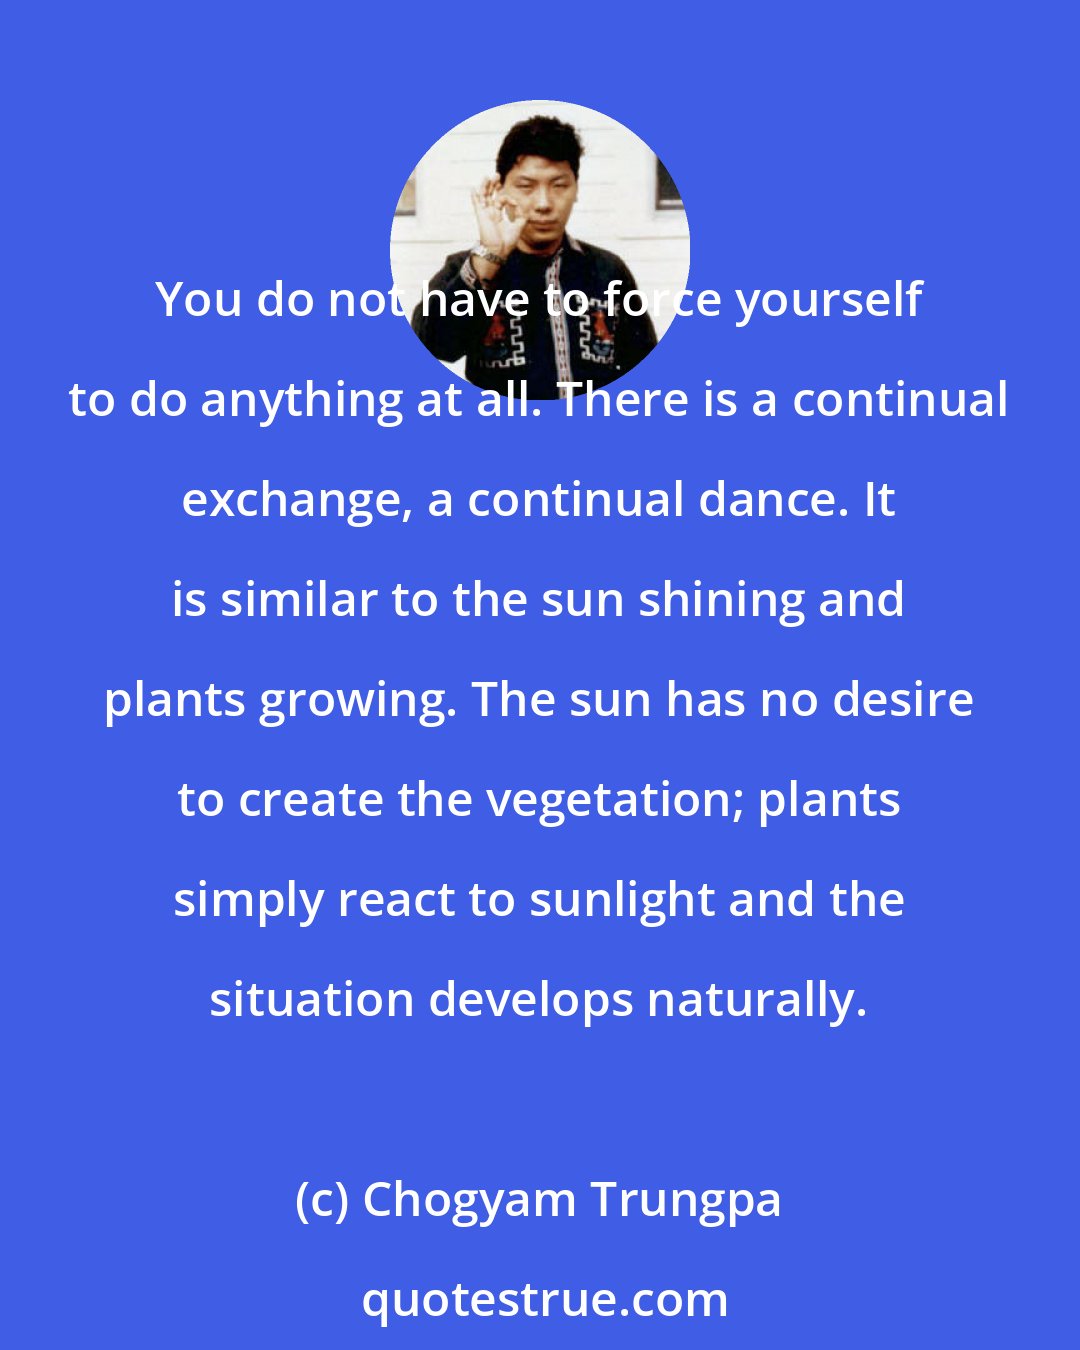 Chogyam Trungpa: You do not have to force yourself to do anything at all. There is a continual exchange, a continual dance. It is similar to the sun shining and plants growing. The sun has no desire to create the vegetation; plants simply react to sunlight and the situation develops naturally.